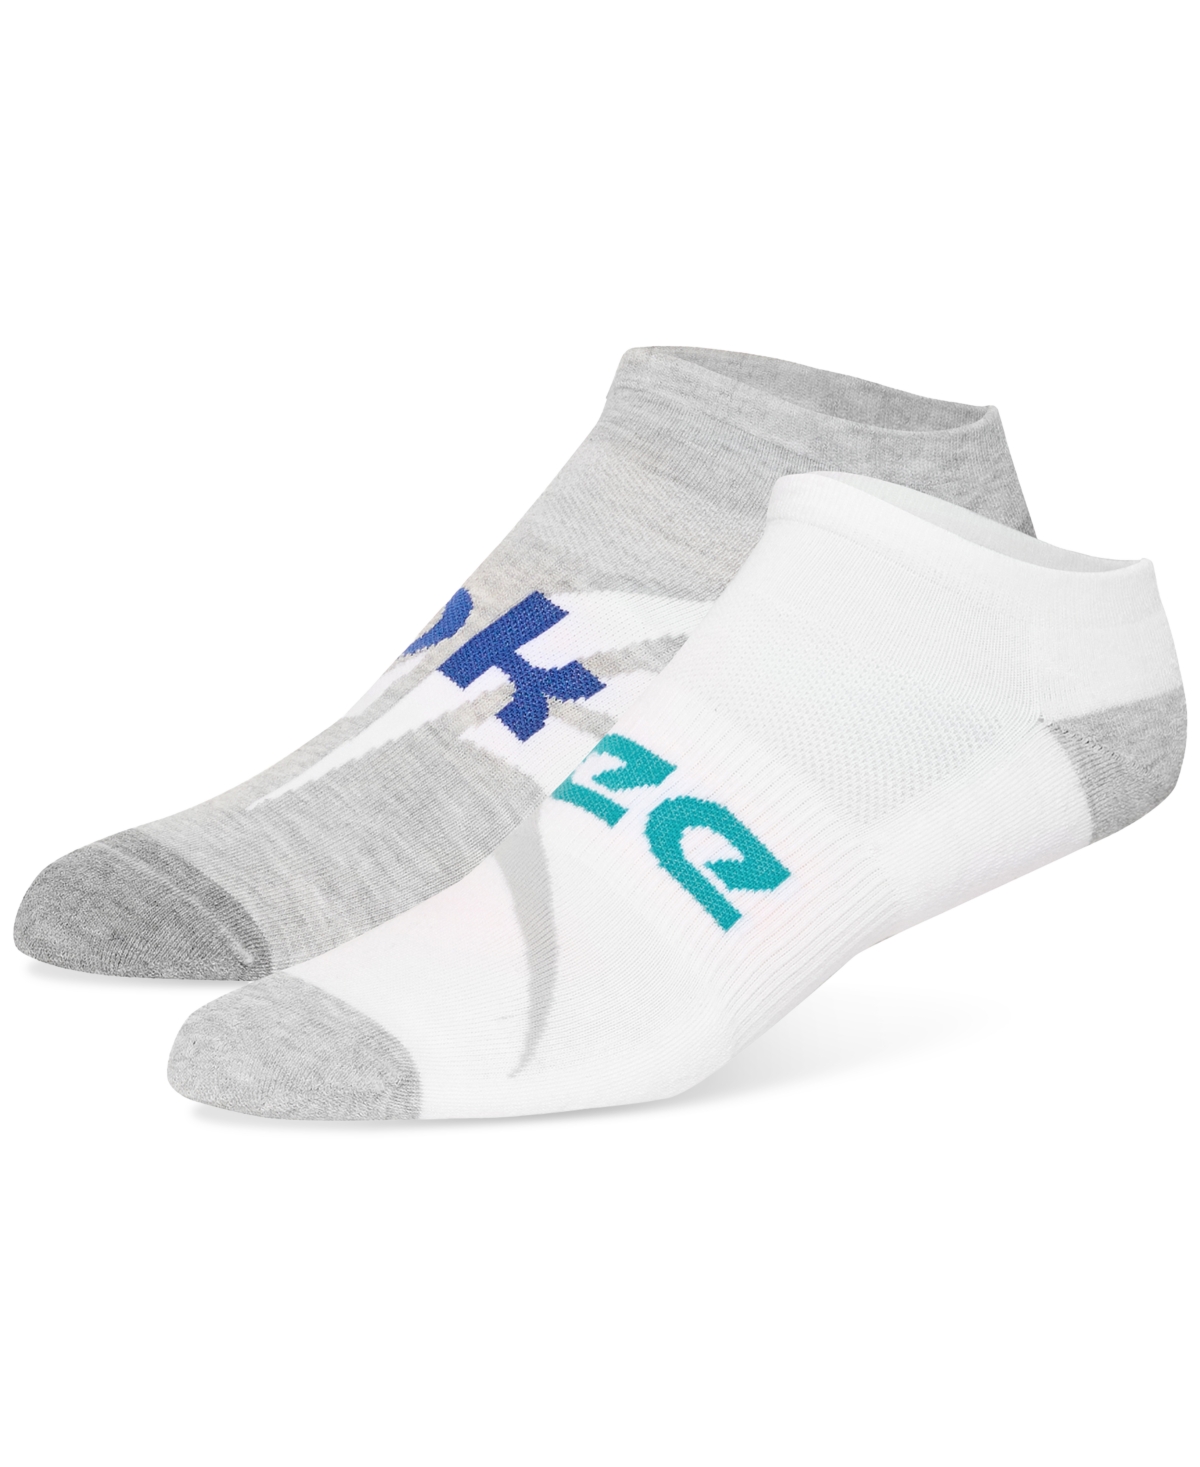 Men's Select Terry Low-Cut Running Socks, Pack of 2 - White